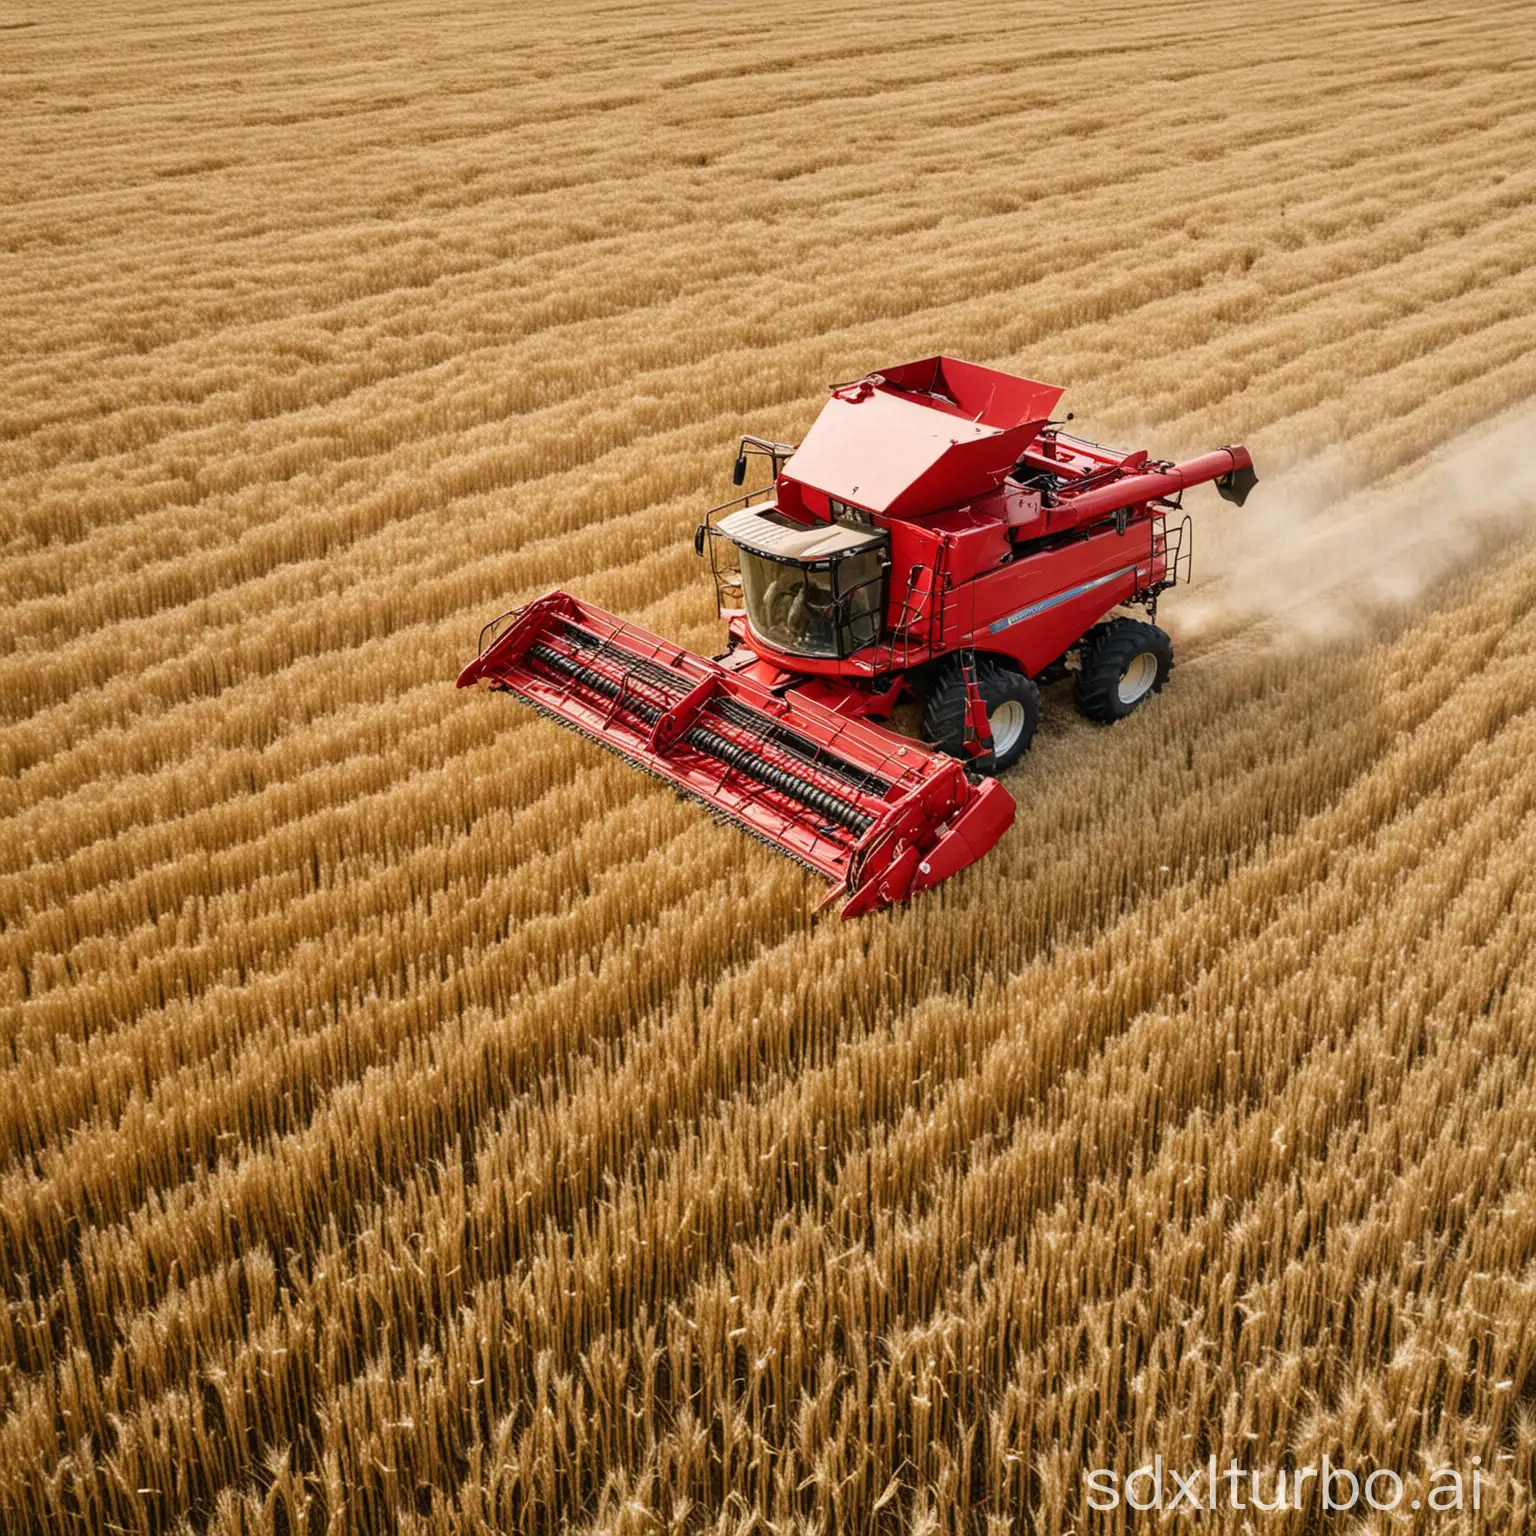 A red combine harvester standing in a field of wheat. The combine harvester is large and powerful, and it is ready to harvest the wheat crop.